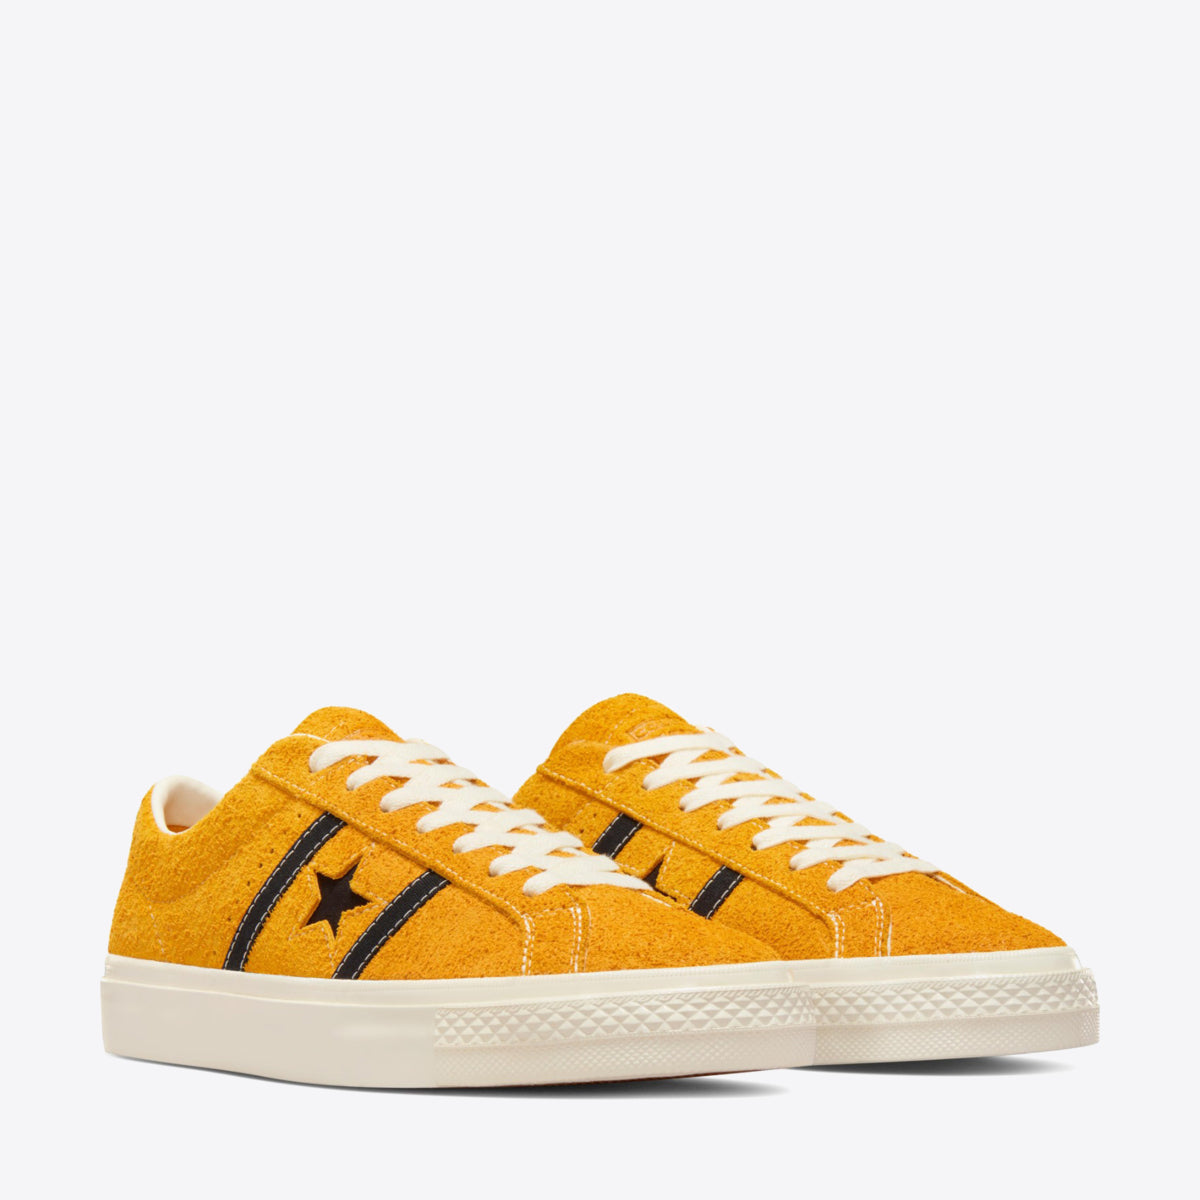 CONVERSE One Star Academy Pro Low Sunflower Gold/Black - Image 5